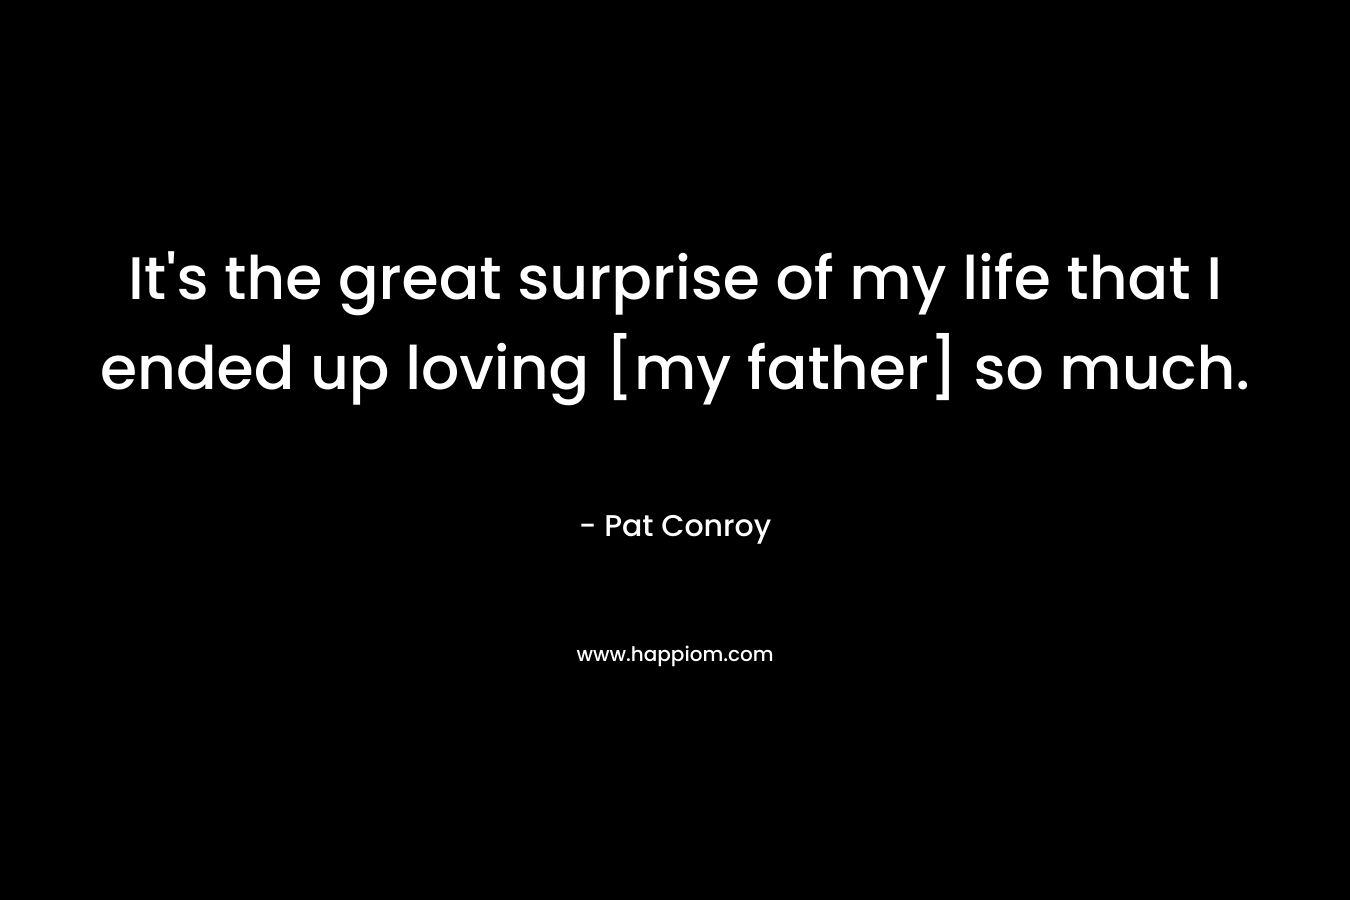 It's the great surprise of my life that I ended up loving [my father] so much.